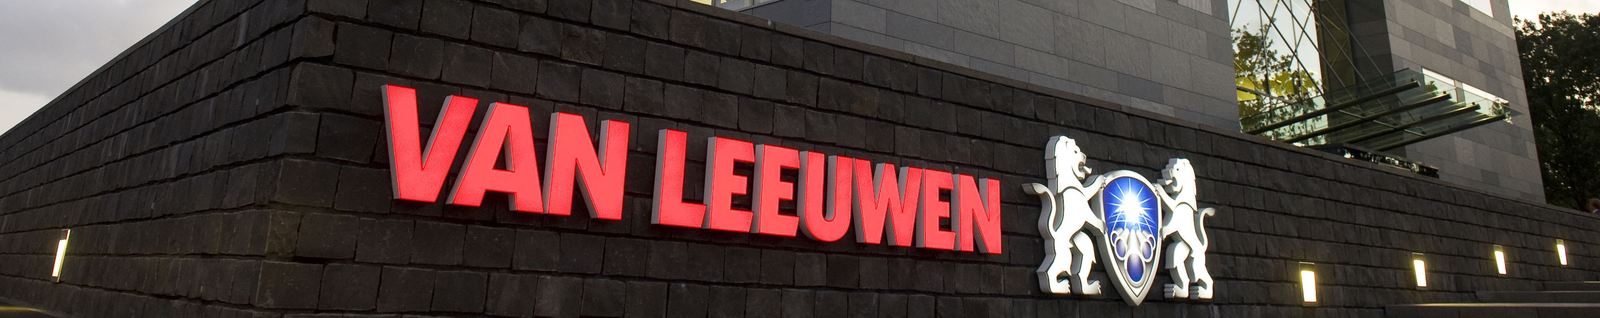 Global projects contributed significantly to overall sales Van Leeuwen